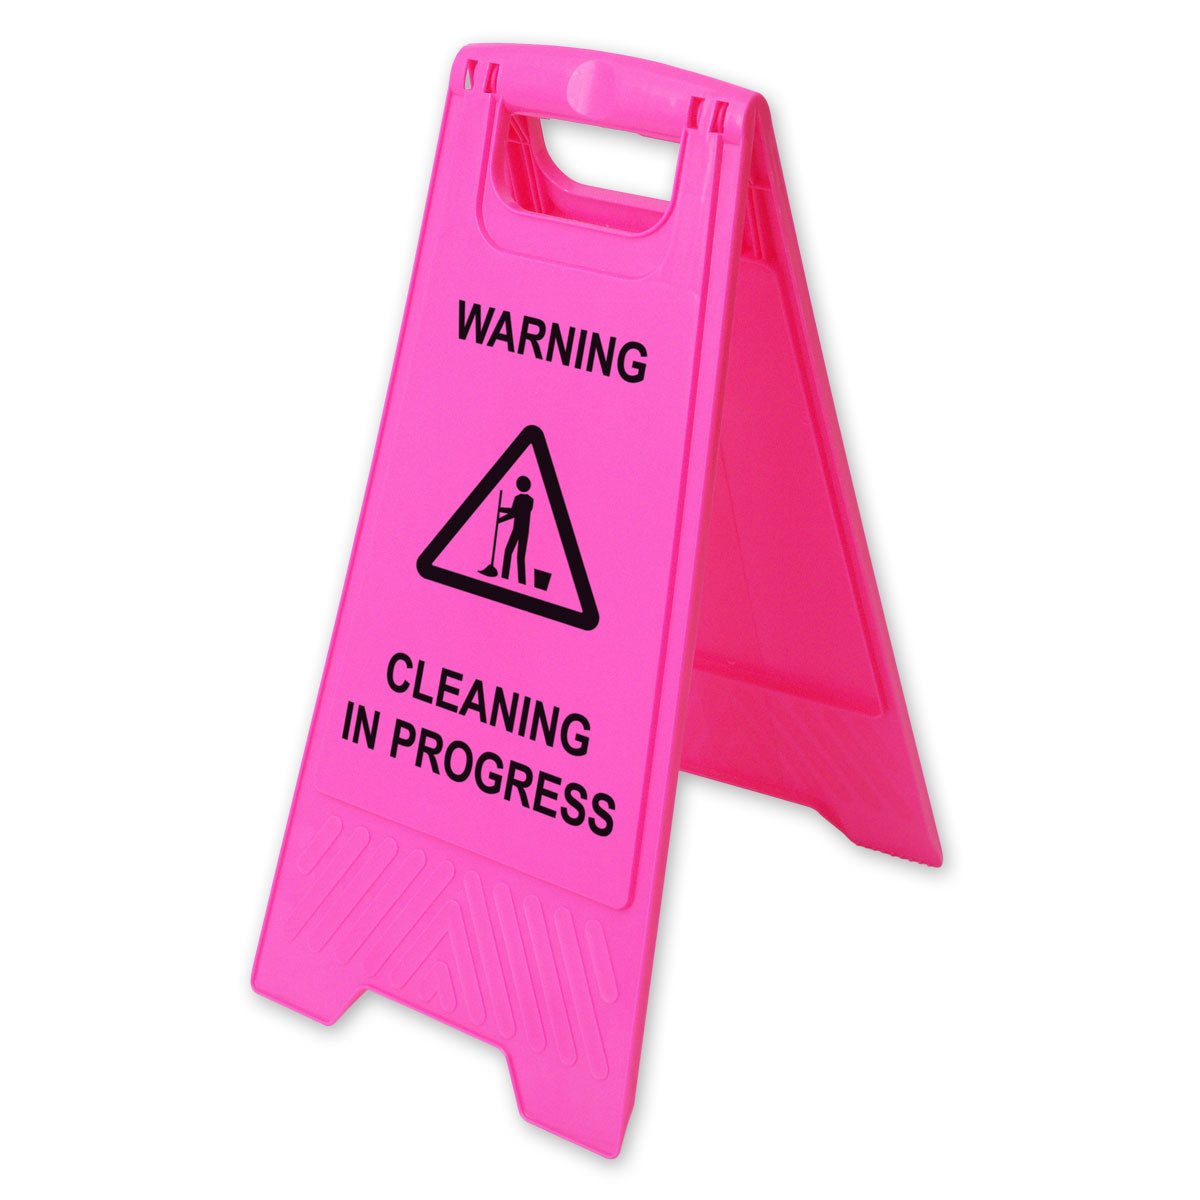 Warning: Cleaning in Progress A-Frame - Pink